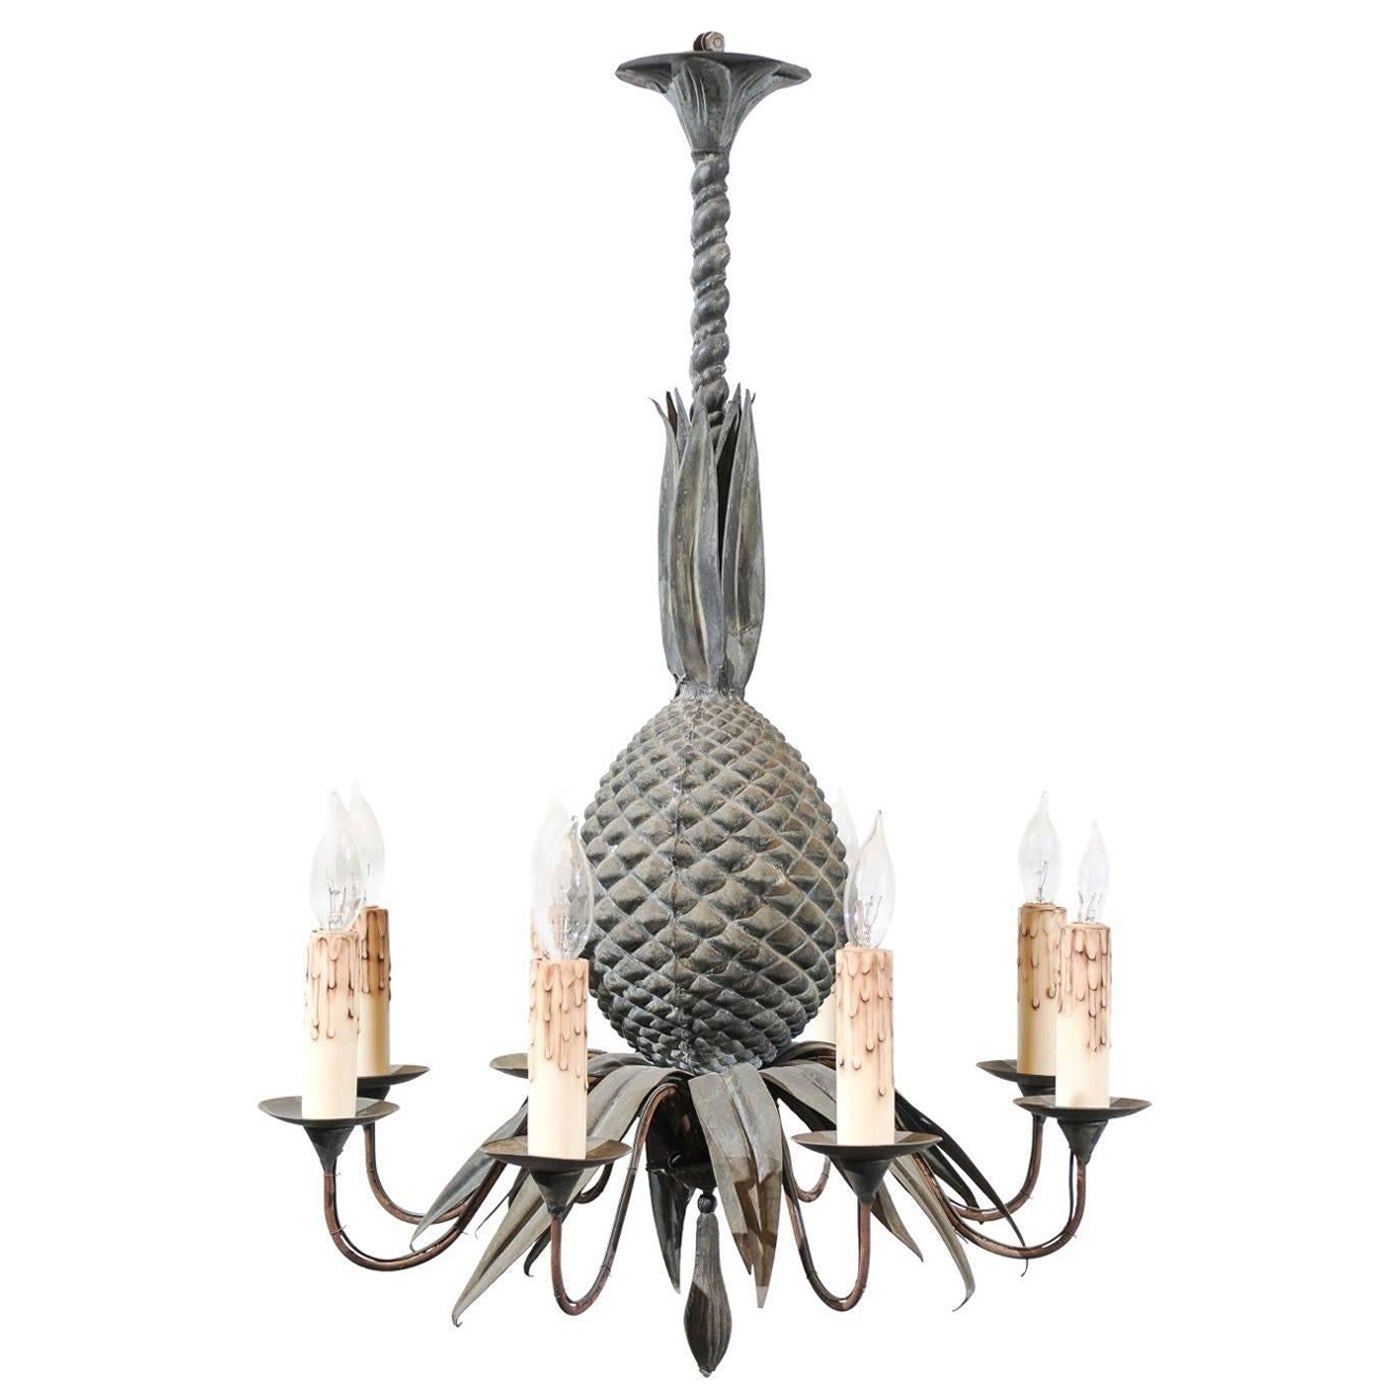 Iron Pineapple Chandelier with 8 Lights, France ca. 1920